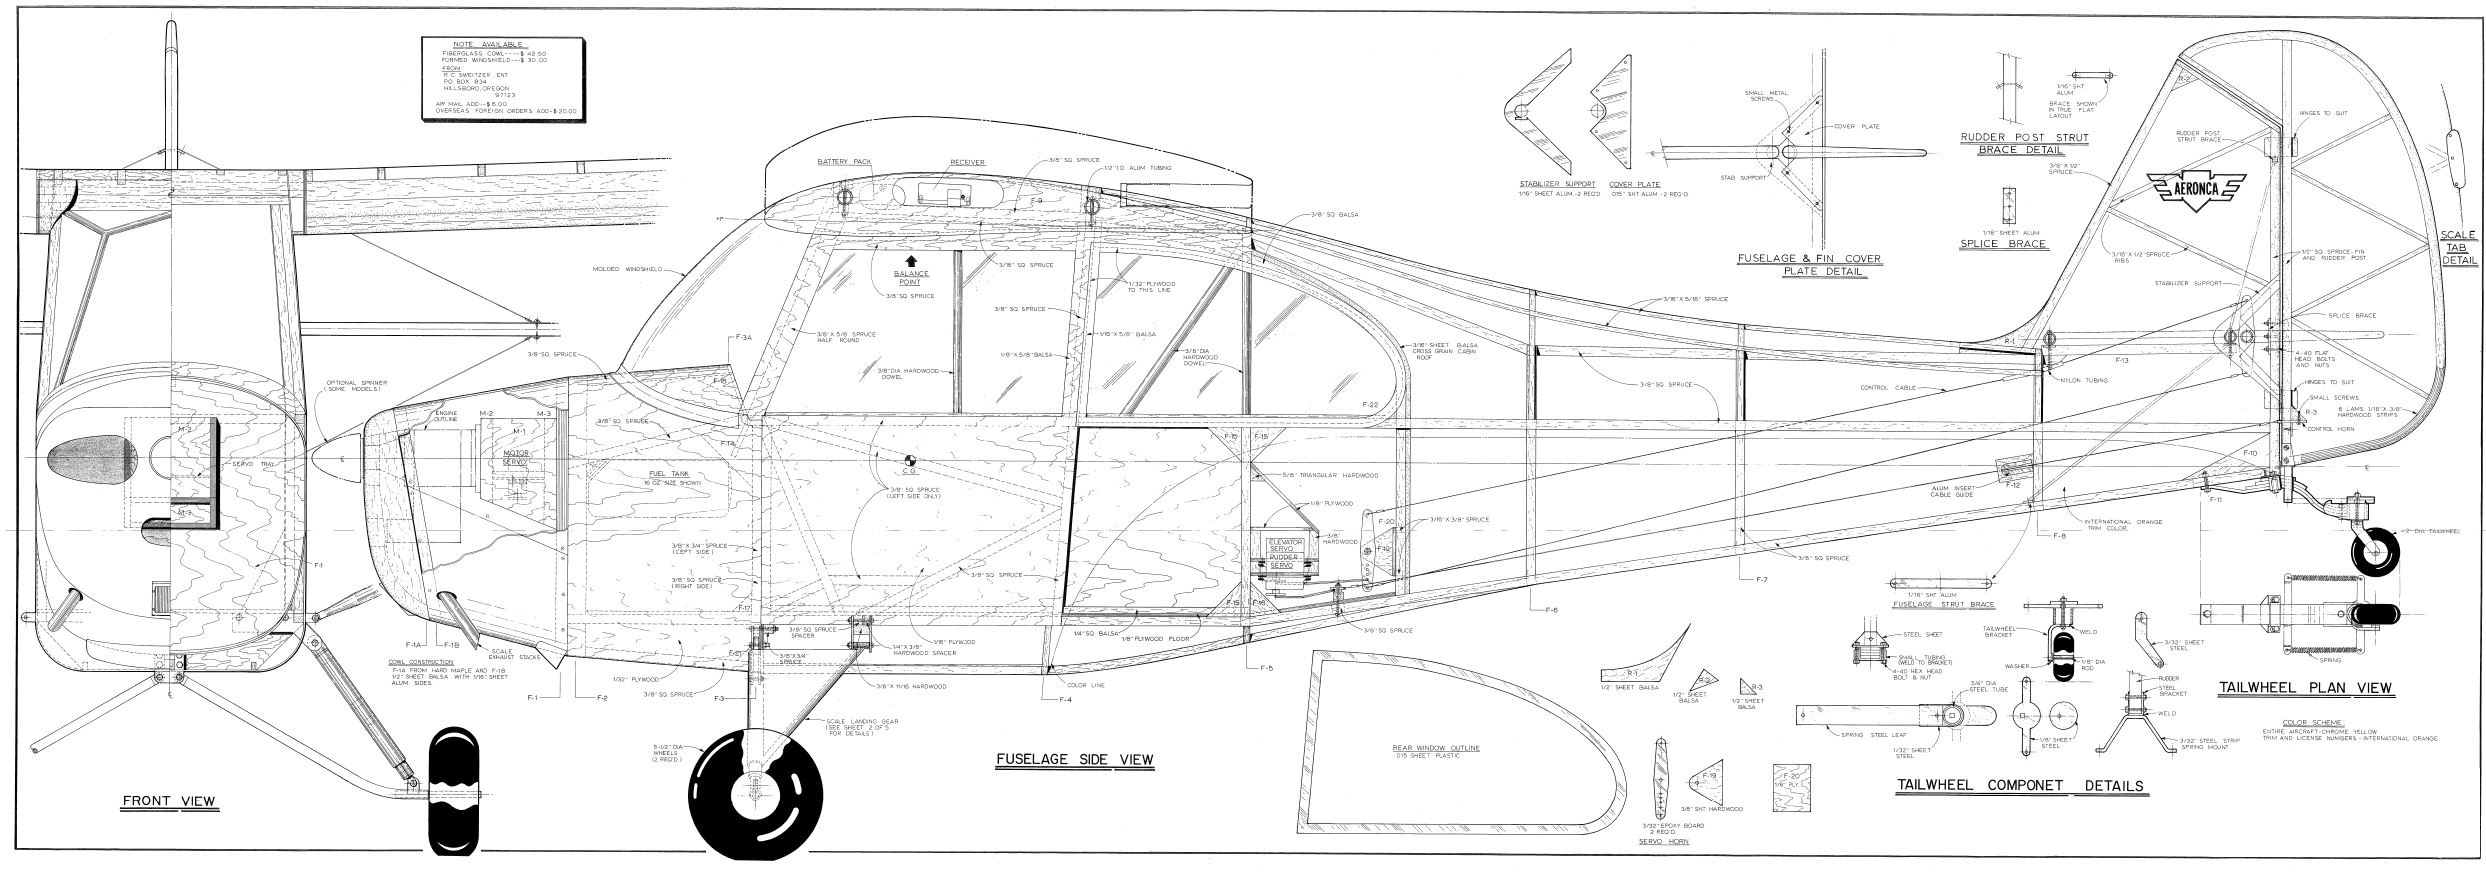 550 Full Scale RC Model Airplane Plans Templates Scratch 